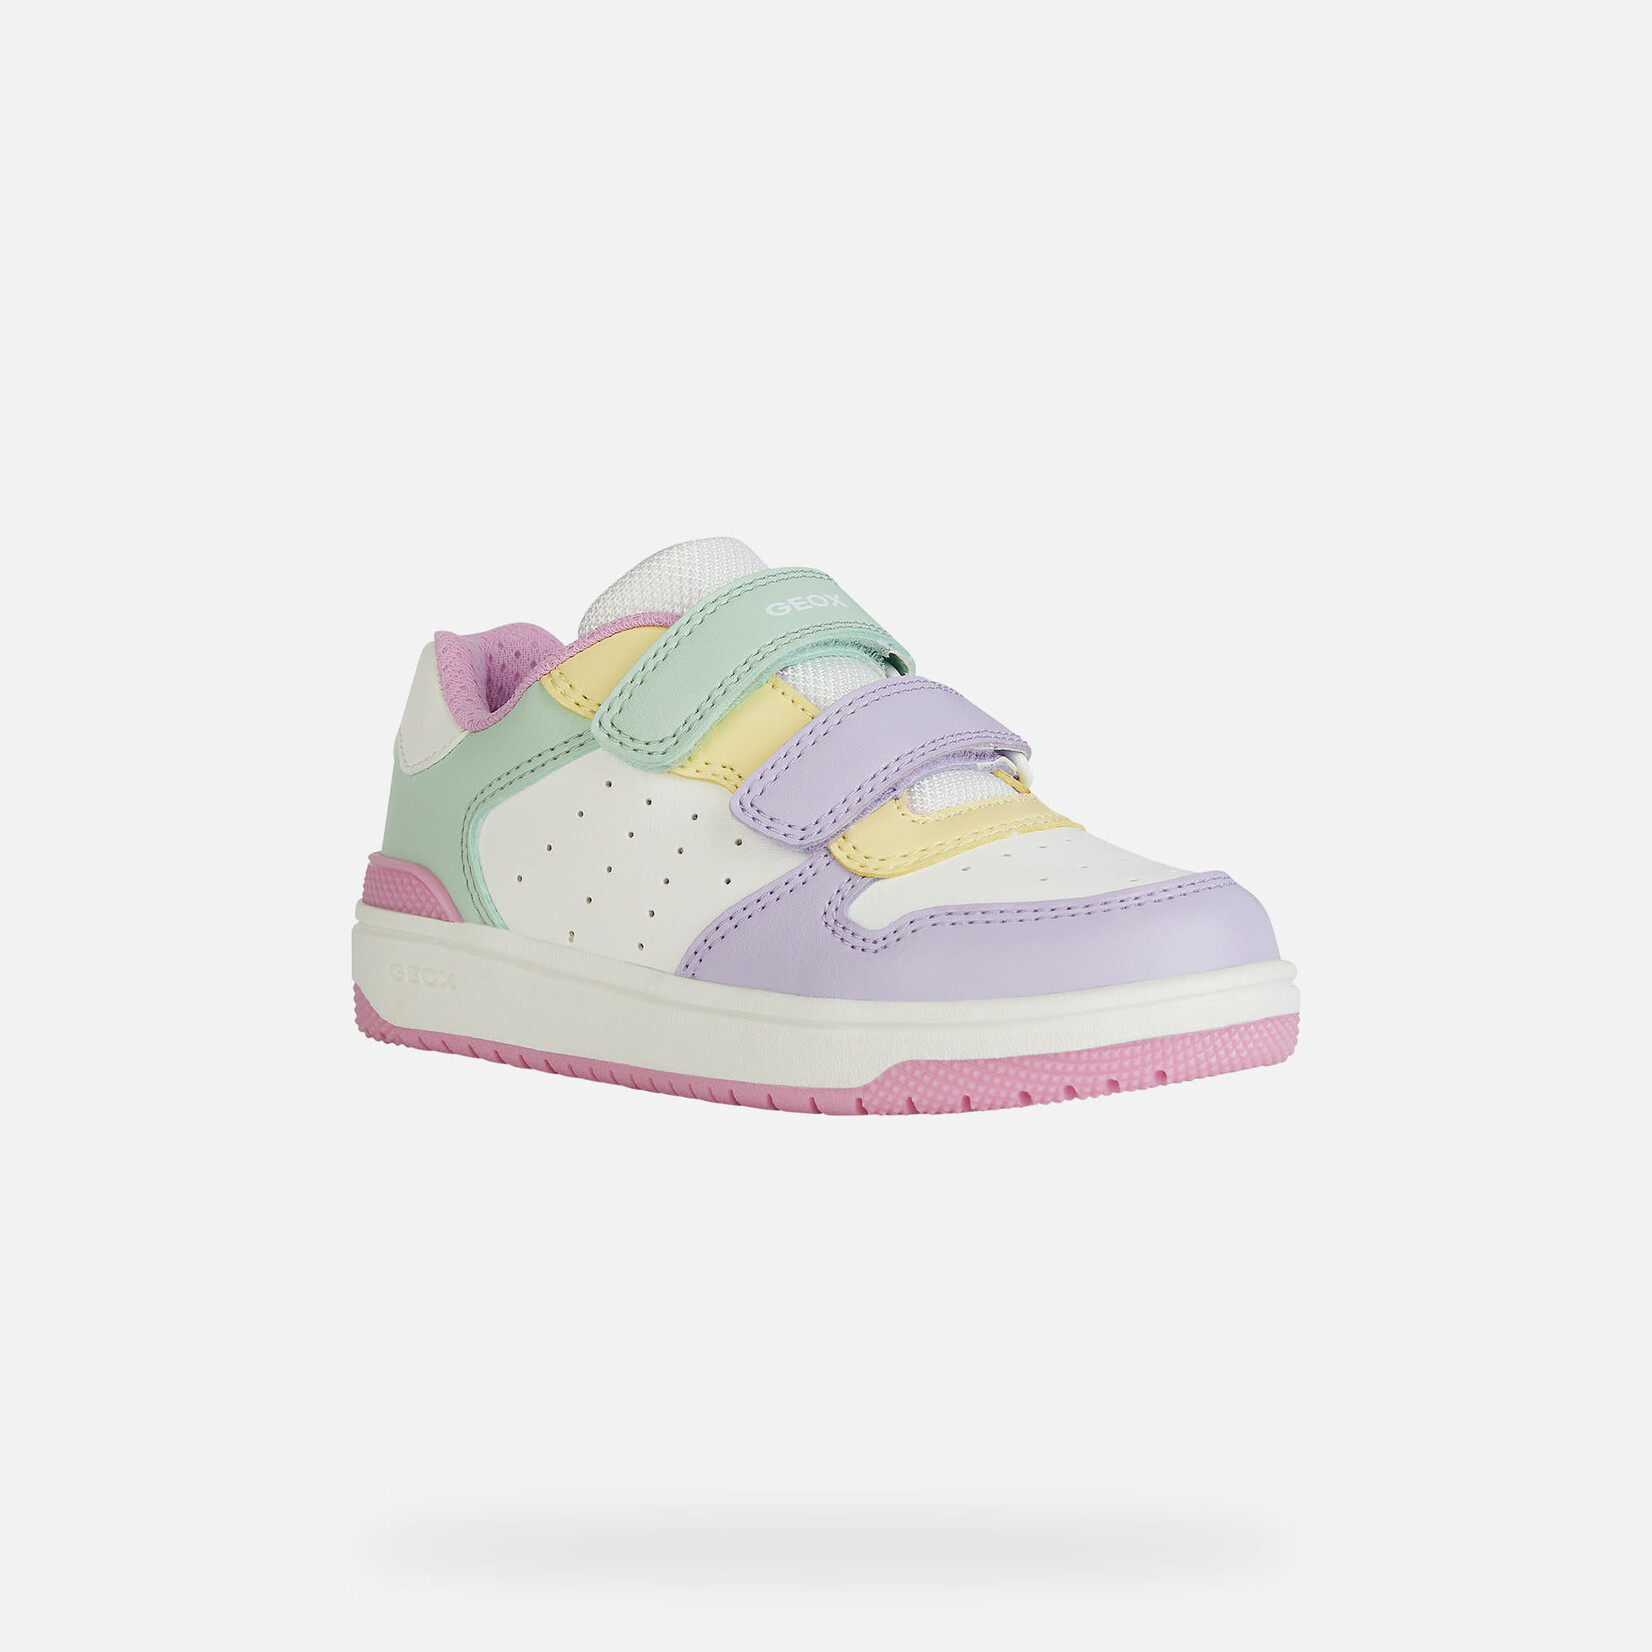 Geox GEOX - White and pastel synthetic leather sneakers 'Washiba - White/Multicolor'